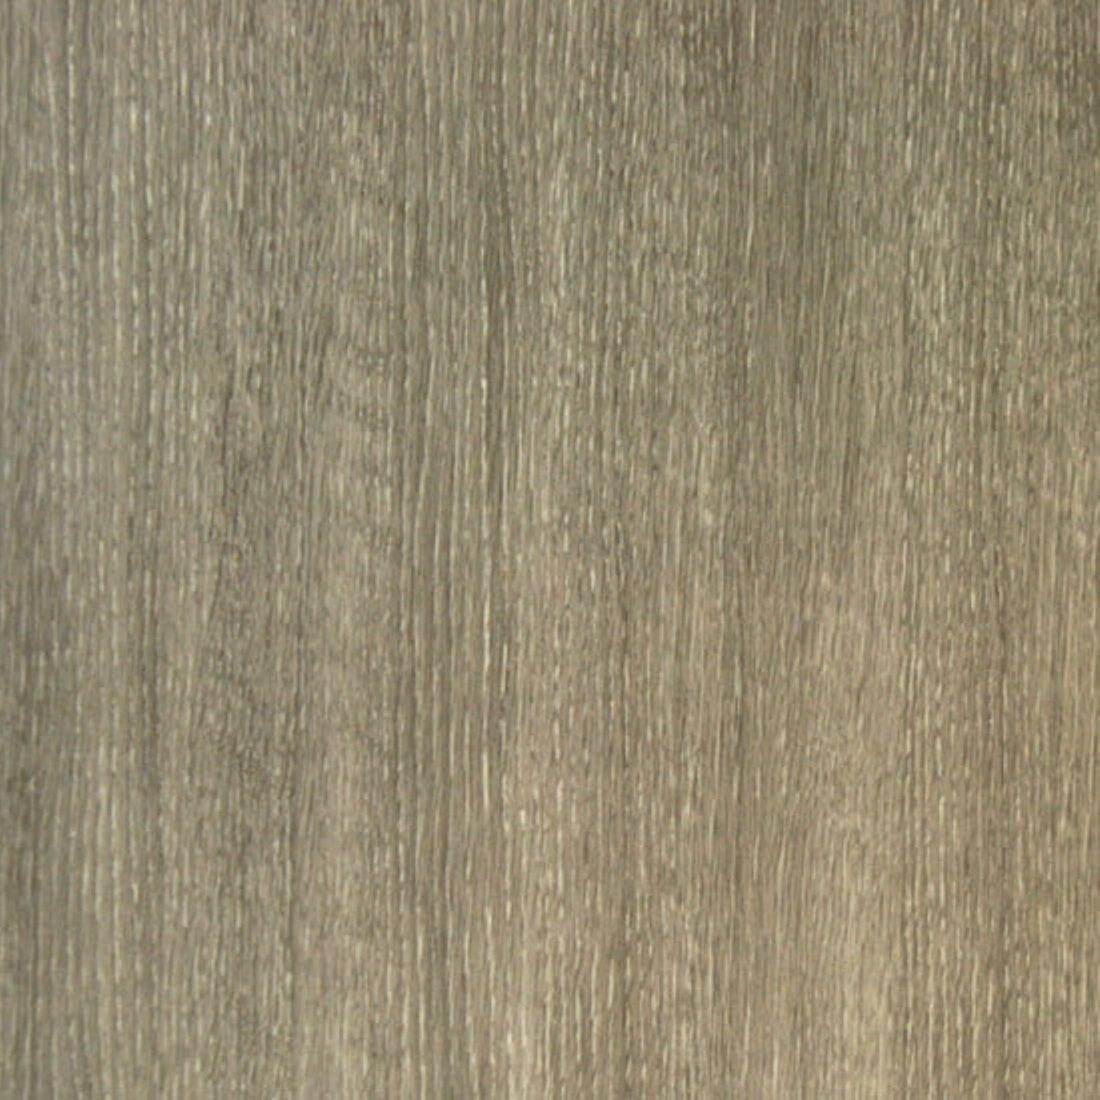 Natural Wood Pattern Wallpaper (Made In Korea) - Stocks Clearance